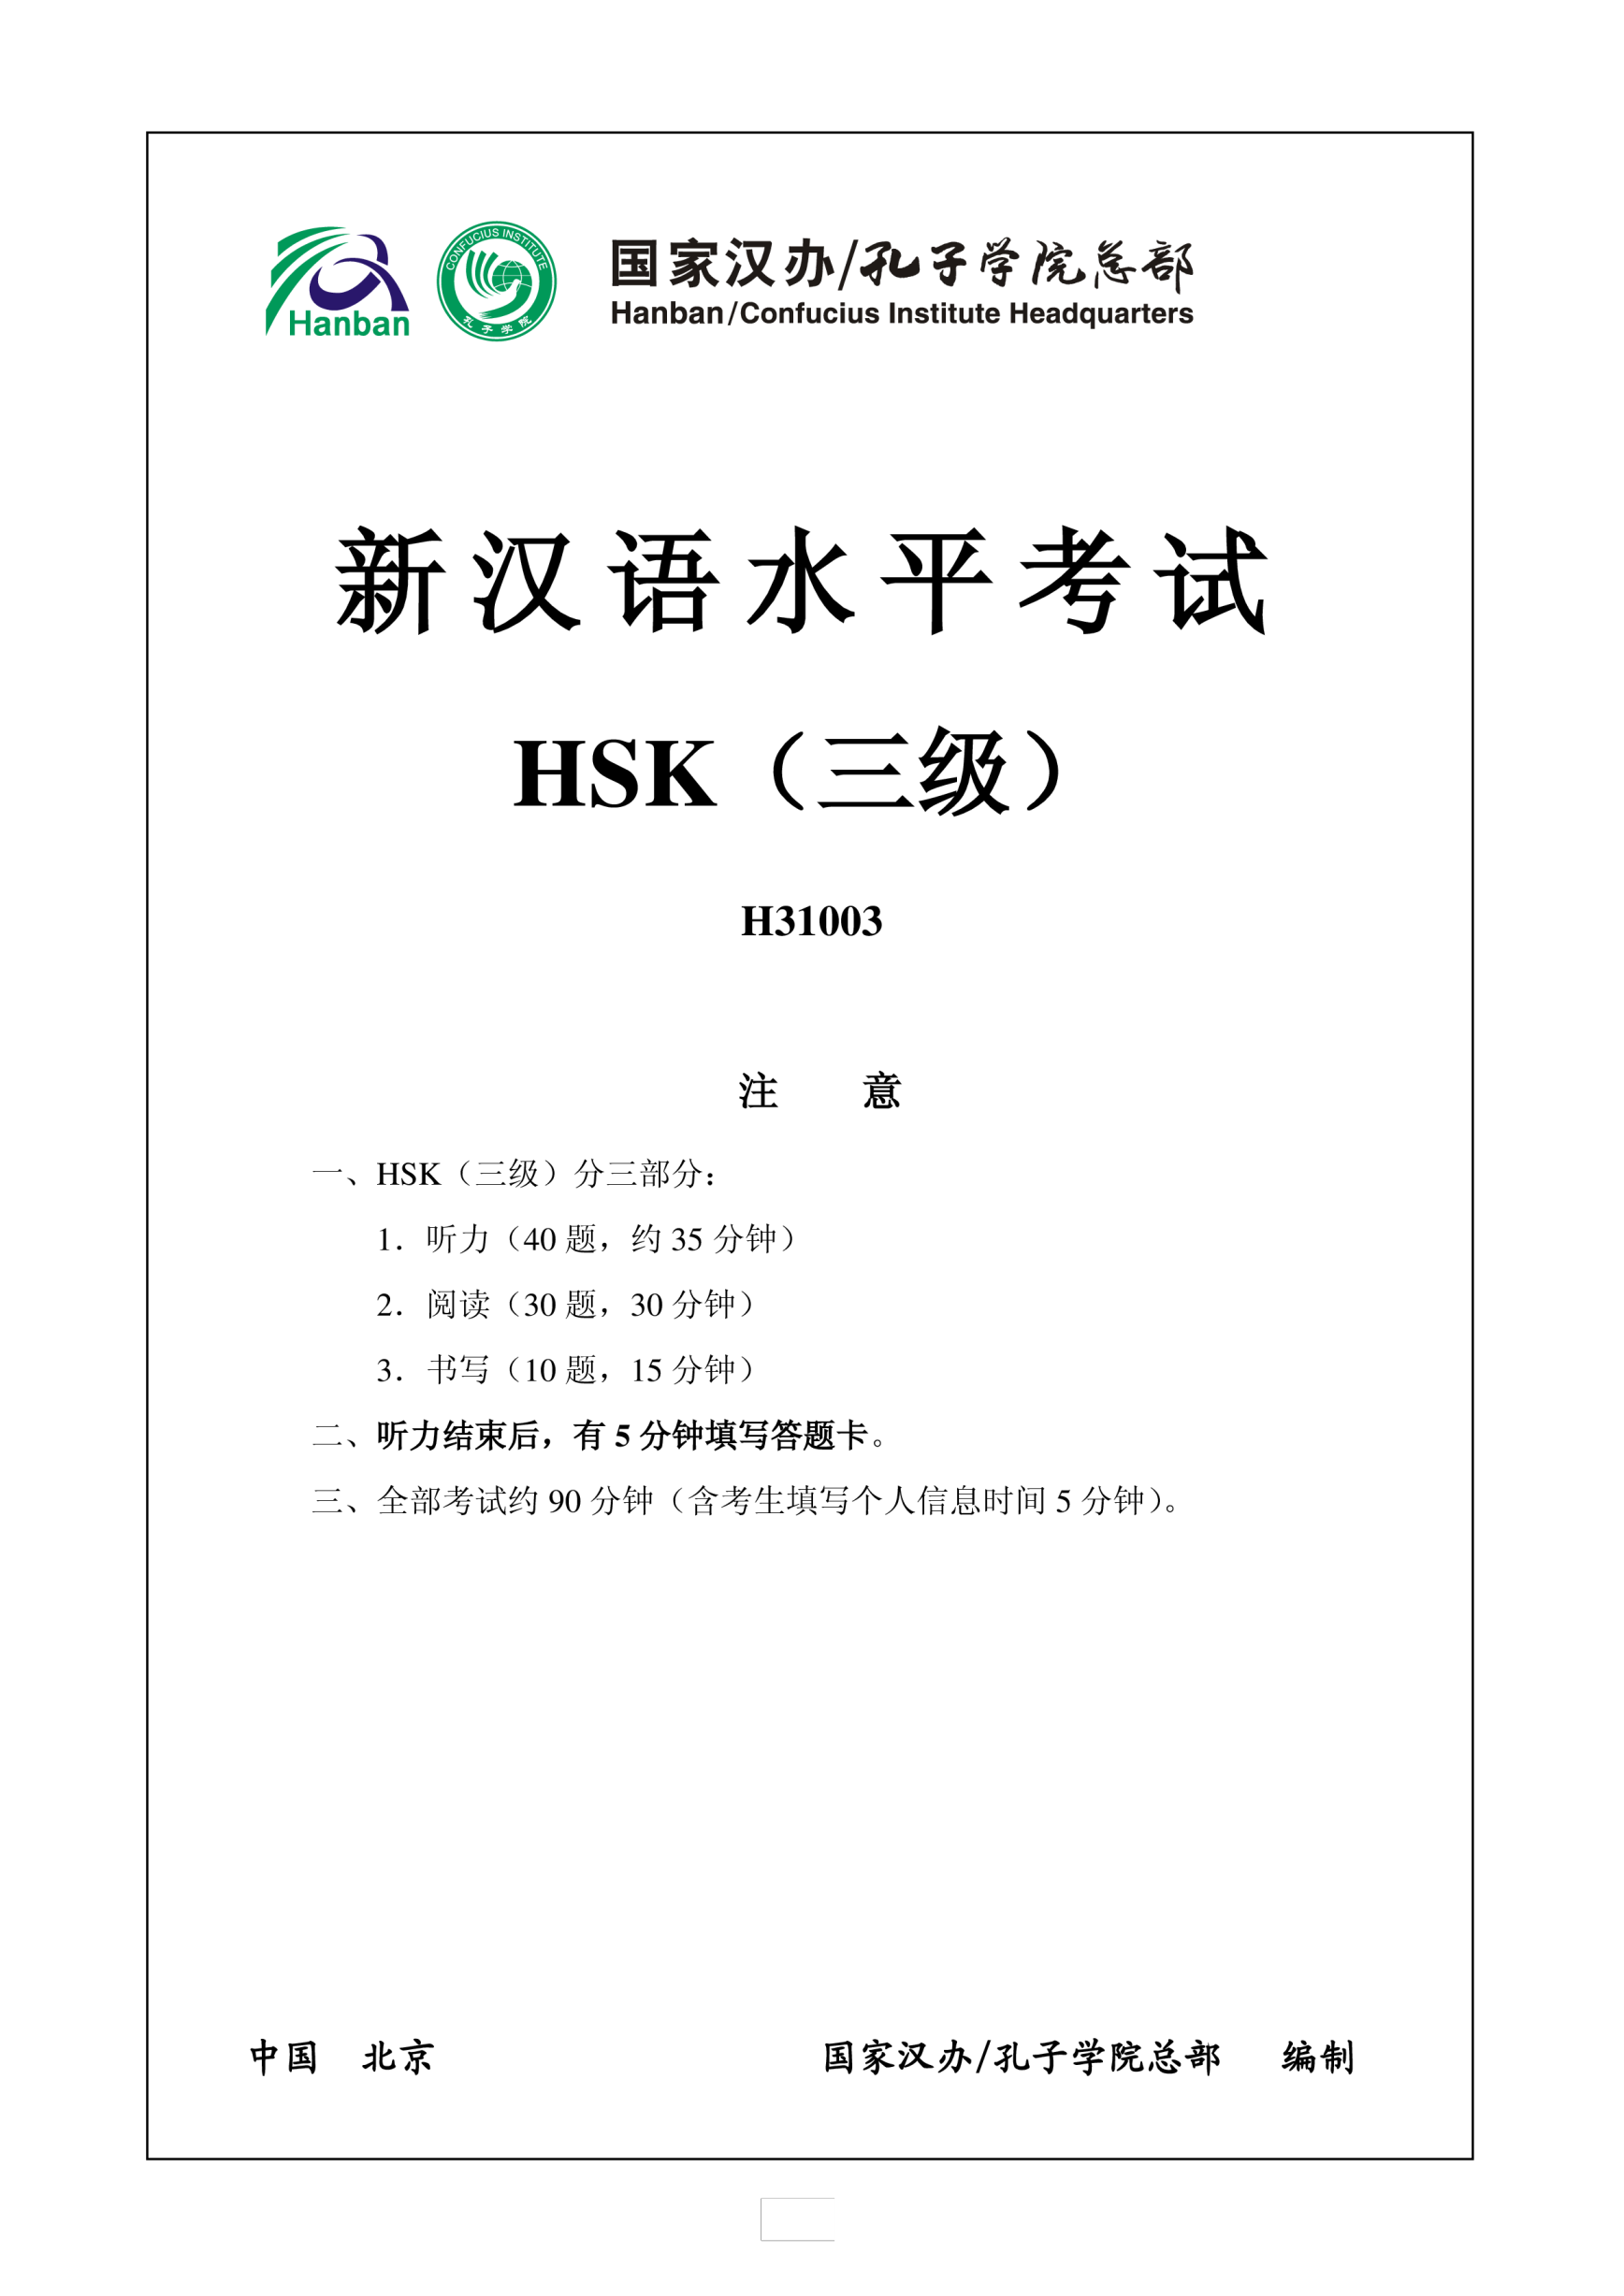 template preview imageHSK3 Chinese Exam including Answers HSK3 H31003